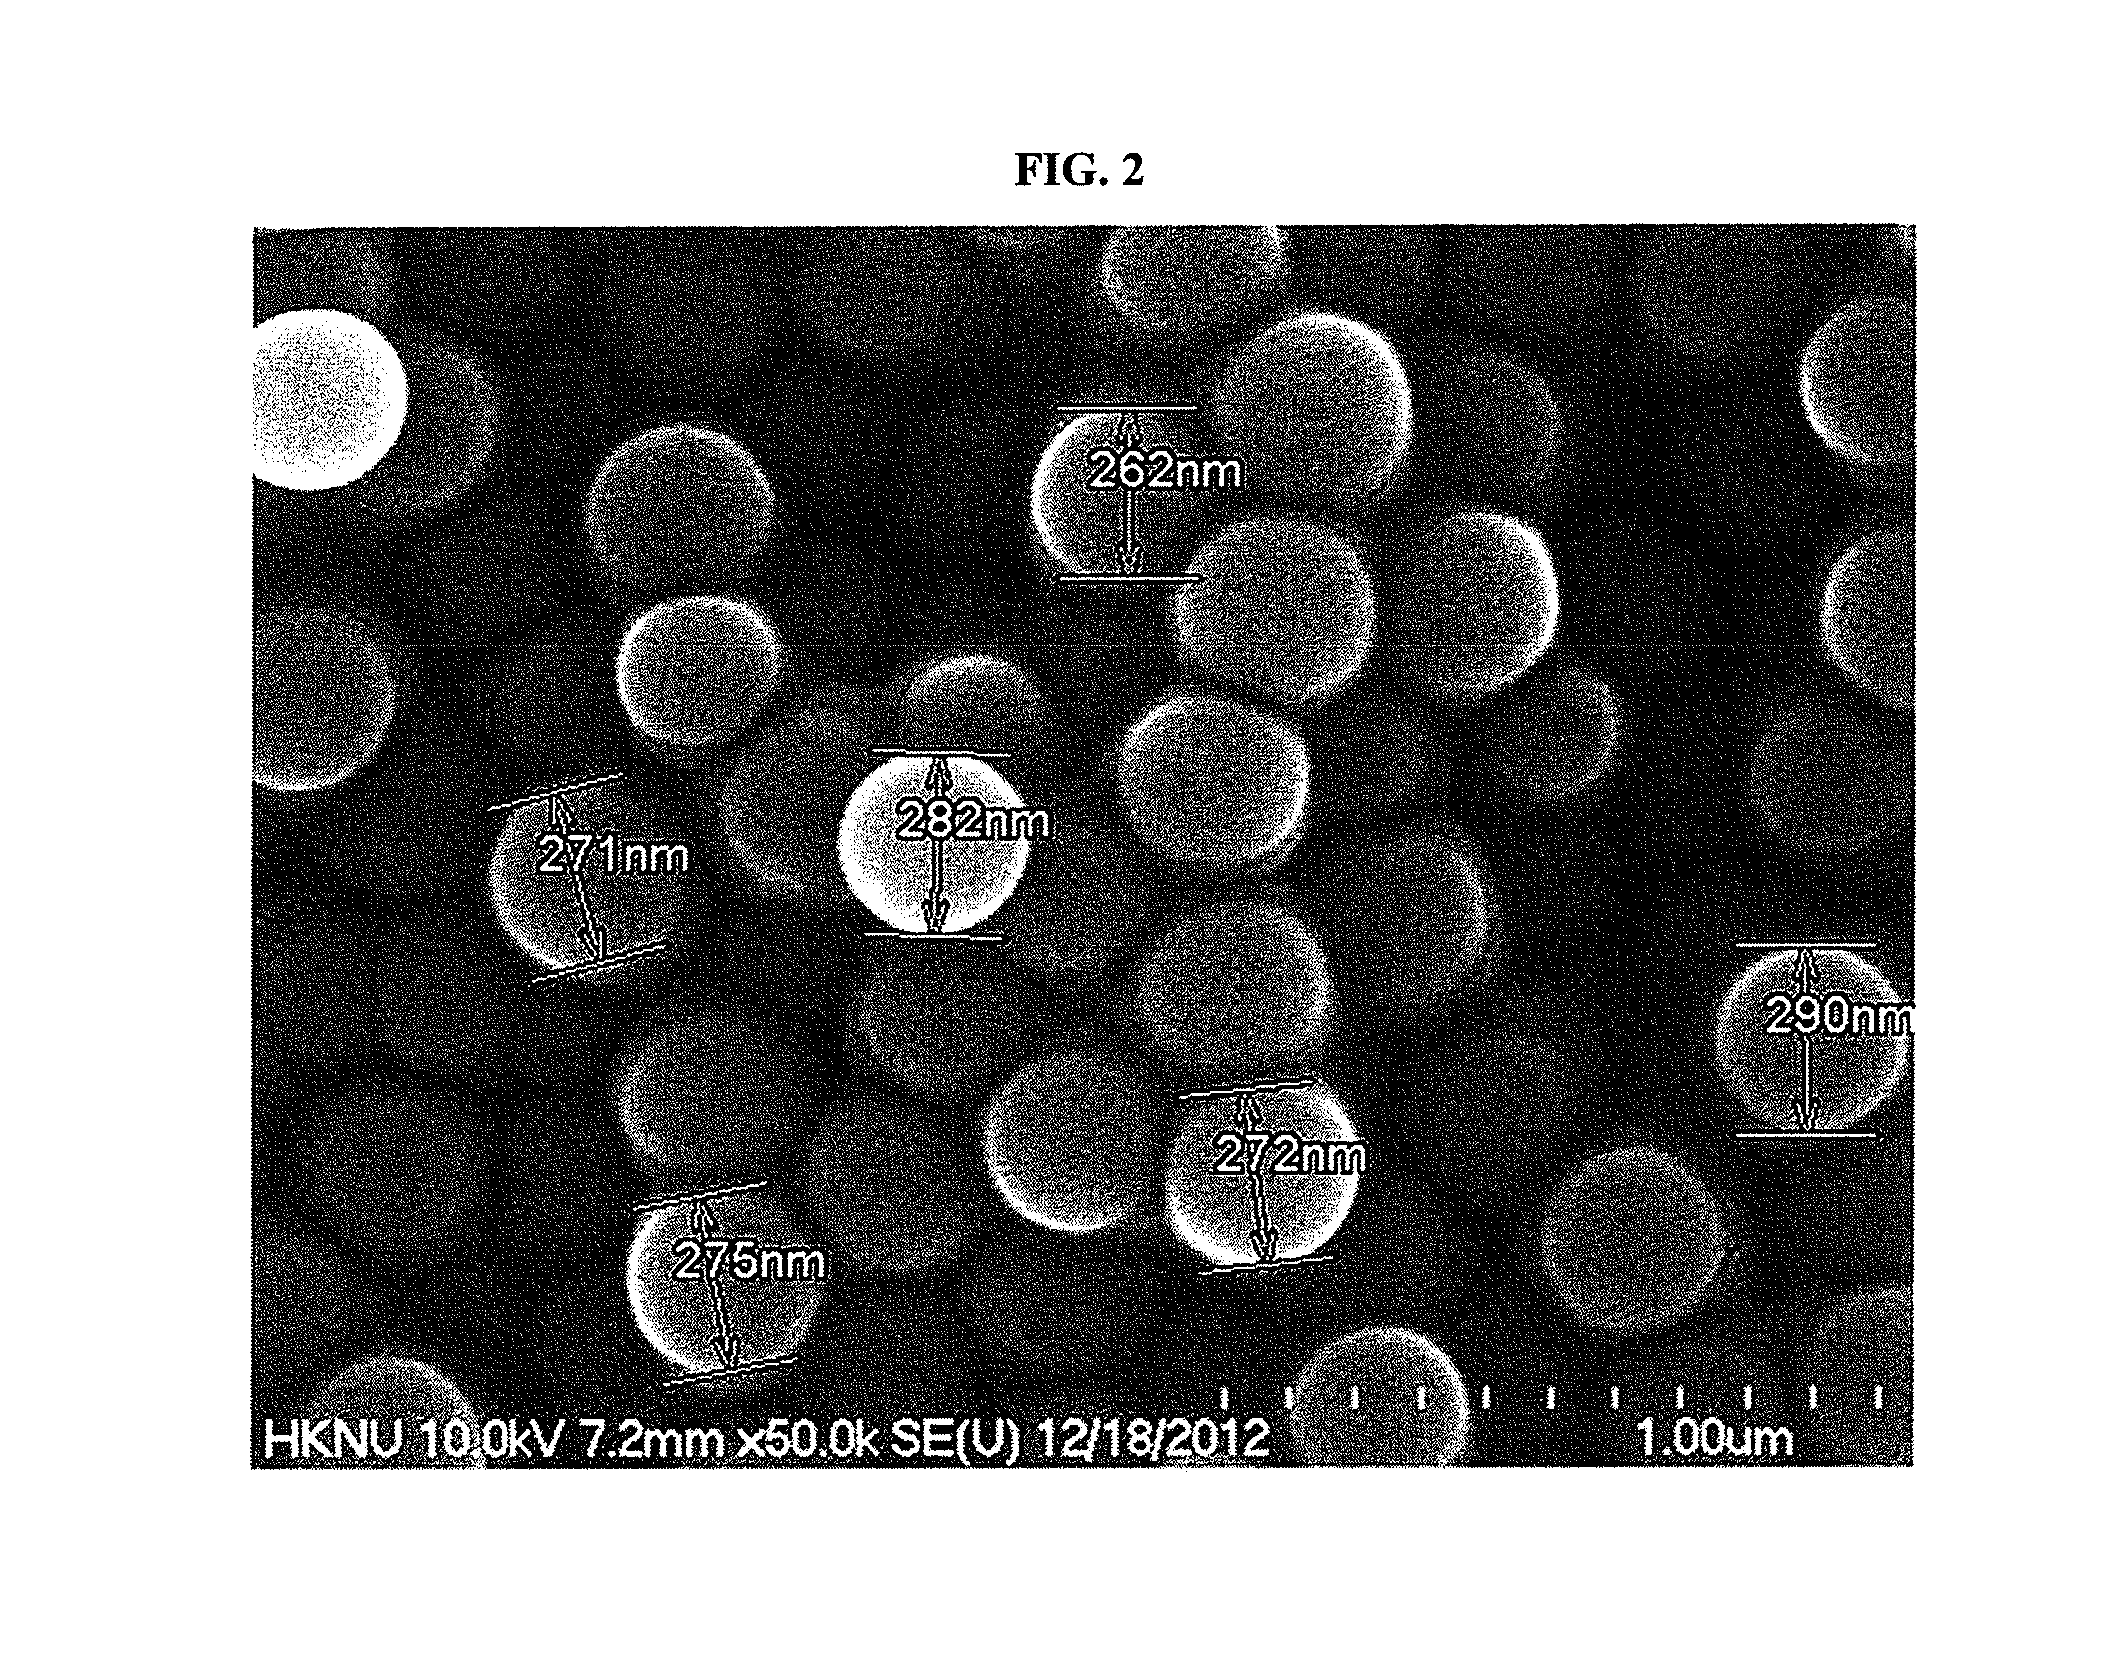 Method for producing bio-alcohol using nanoparticles